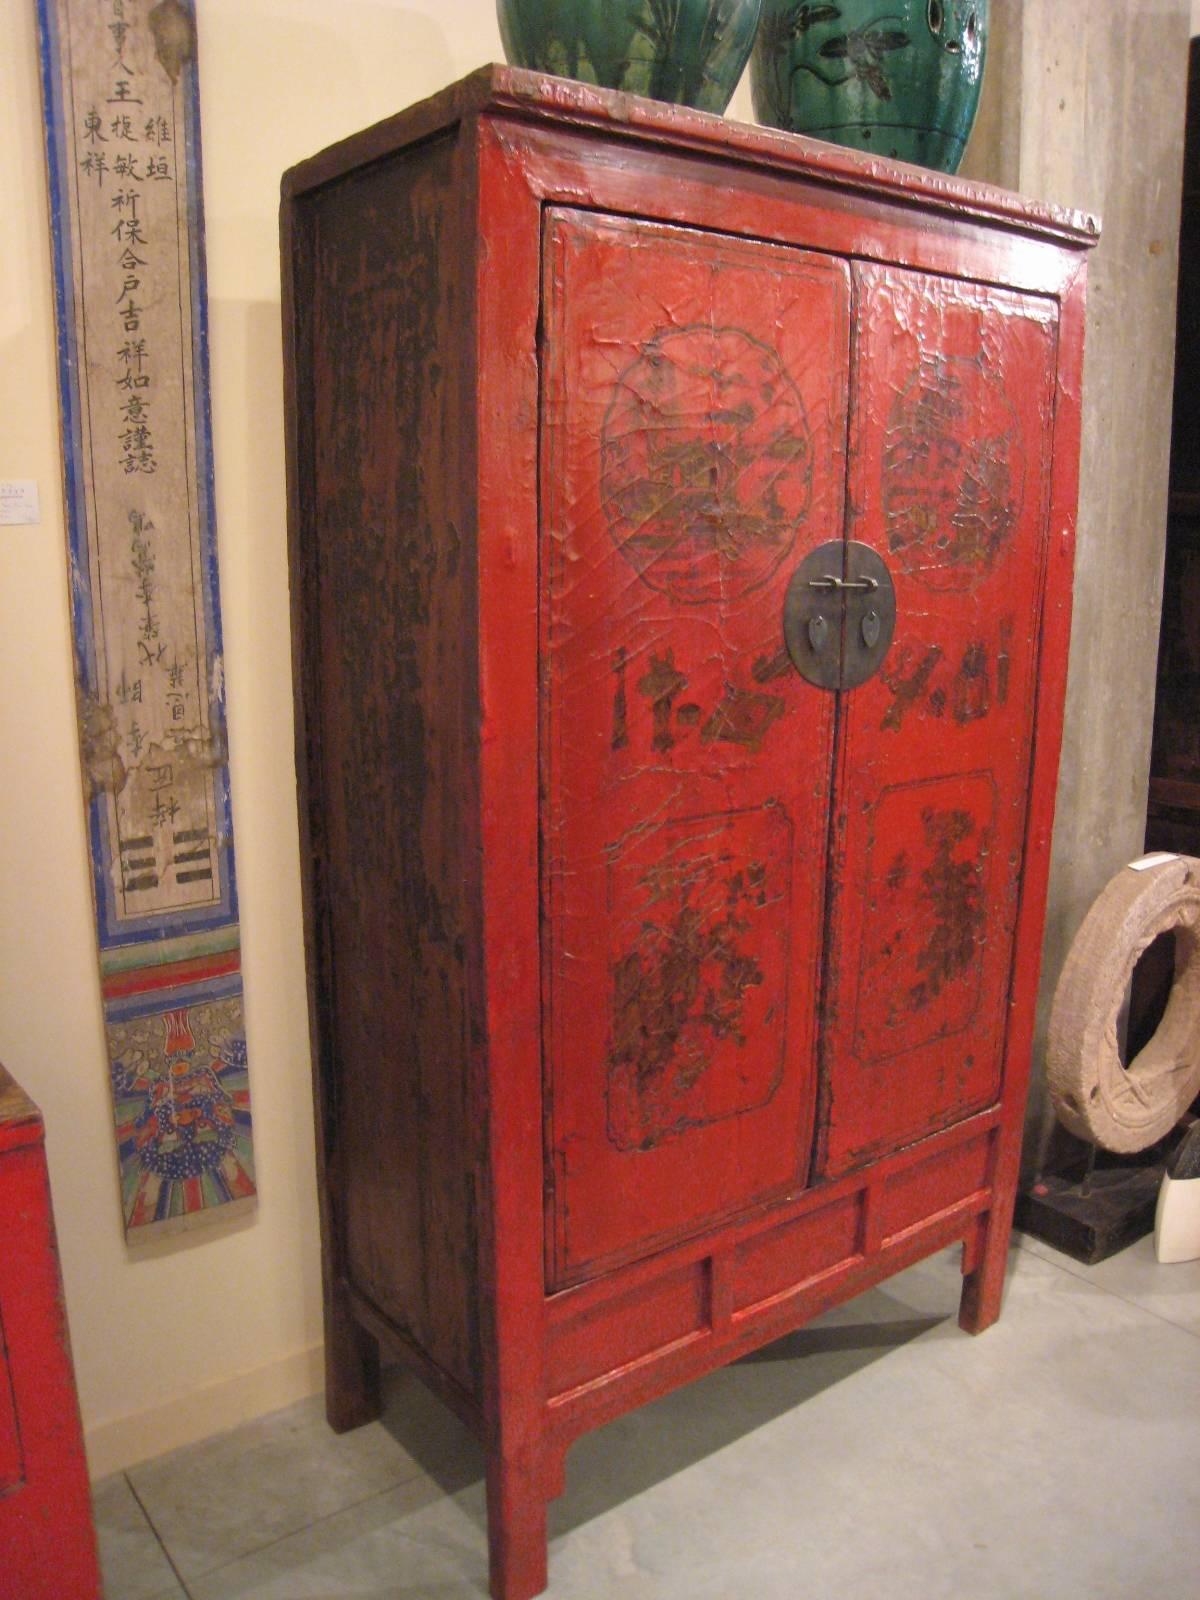 A rare and unusual antique Chinese lacquered cabinet with beautiful, highly detailed painted images on the front.   The striking Chinese red lacquered doors with a snakeskin pattern  contrast perfectly with the remnants of old black lacquer on the